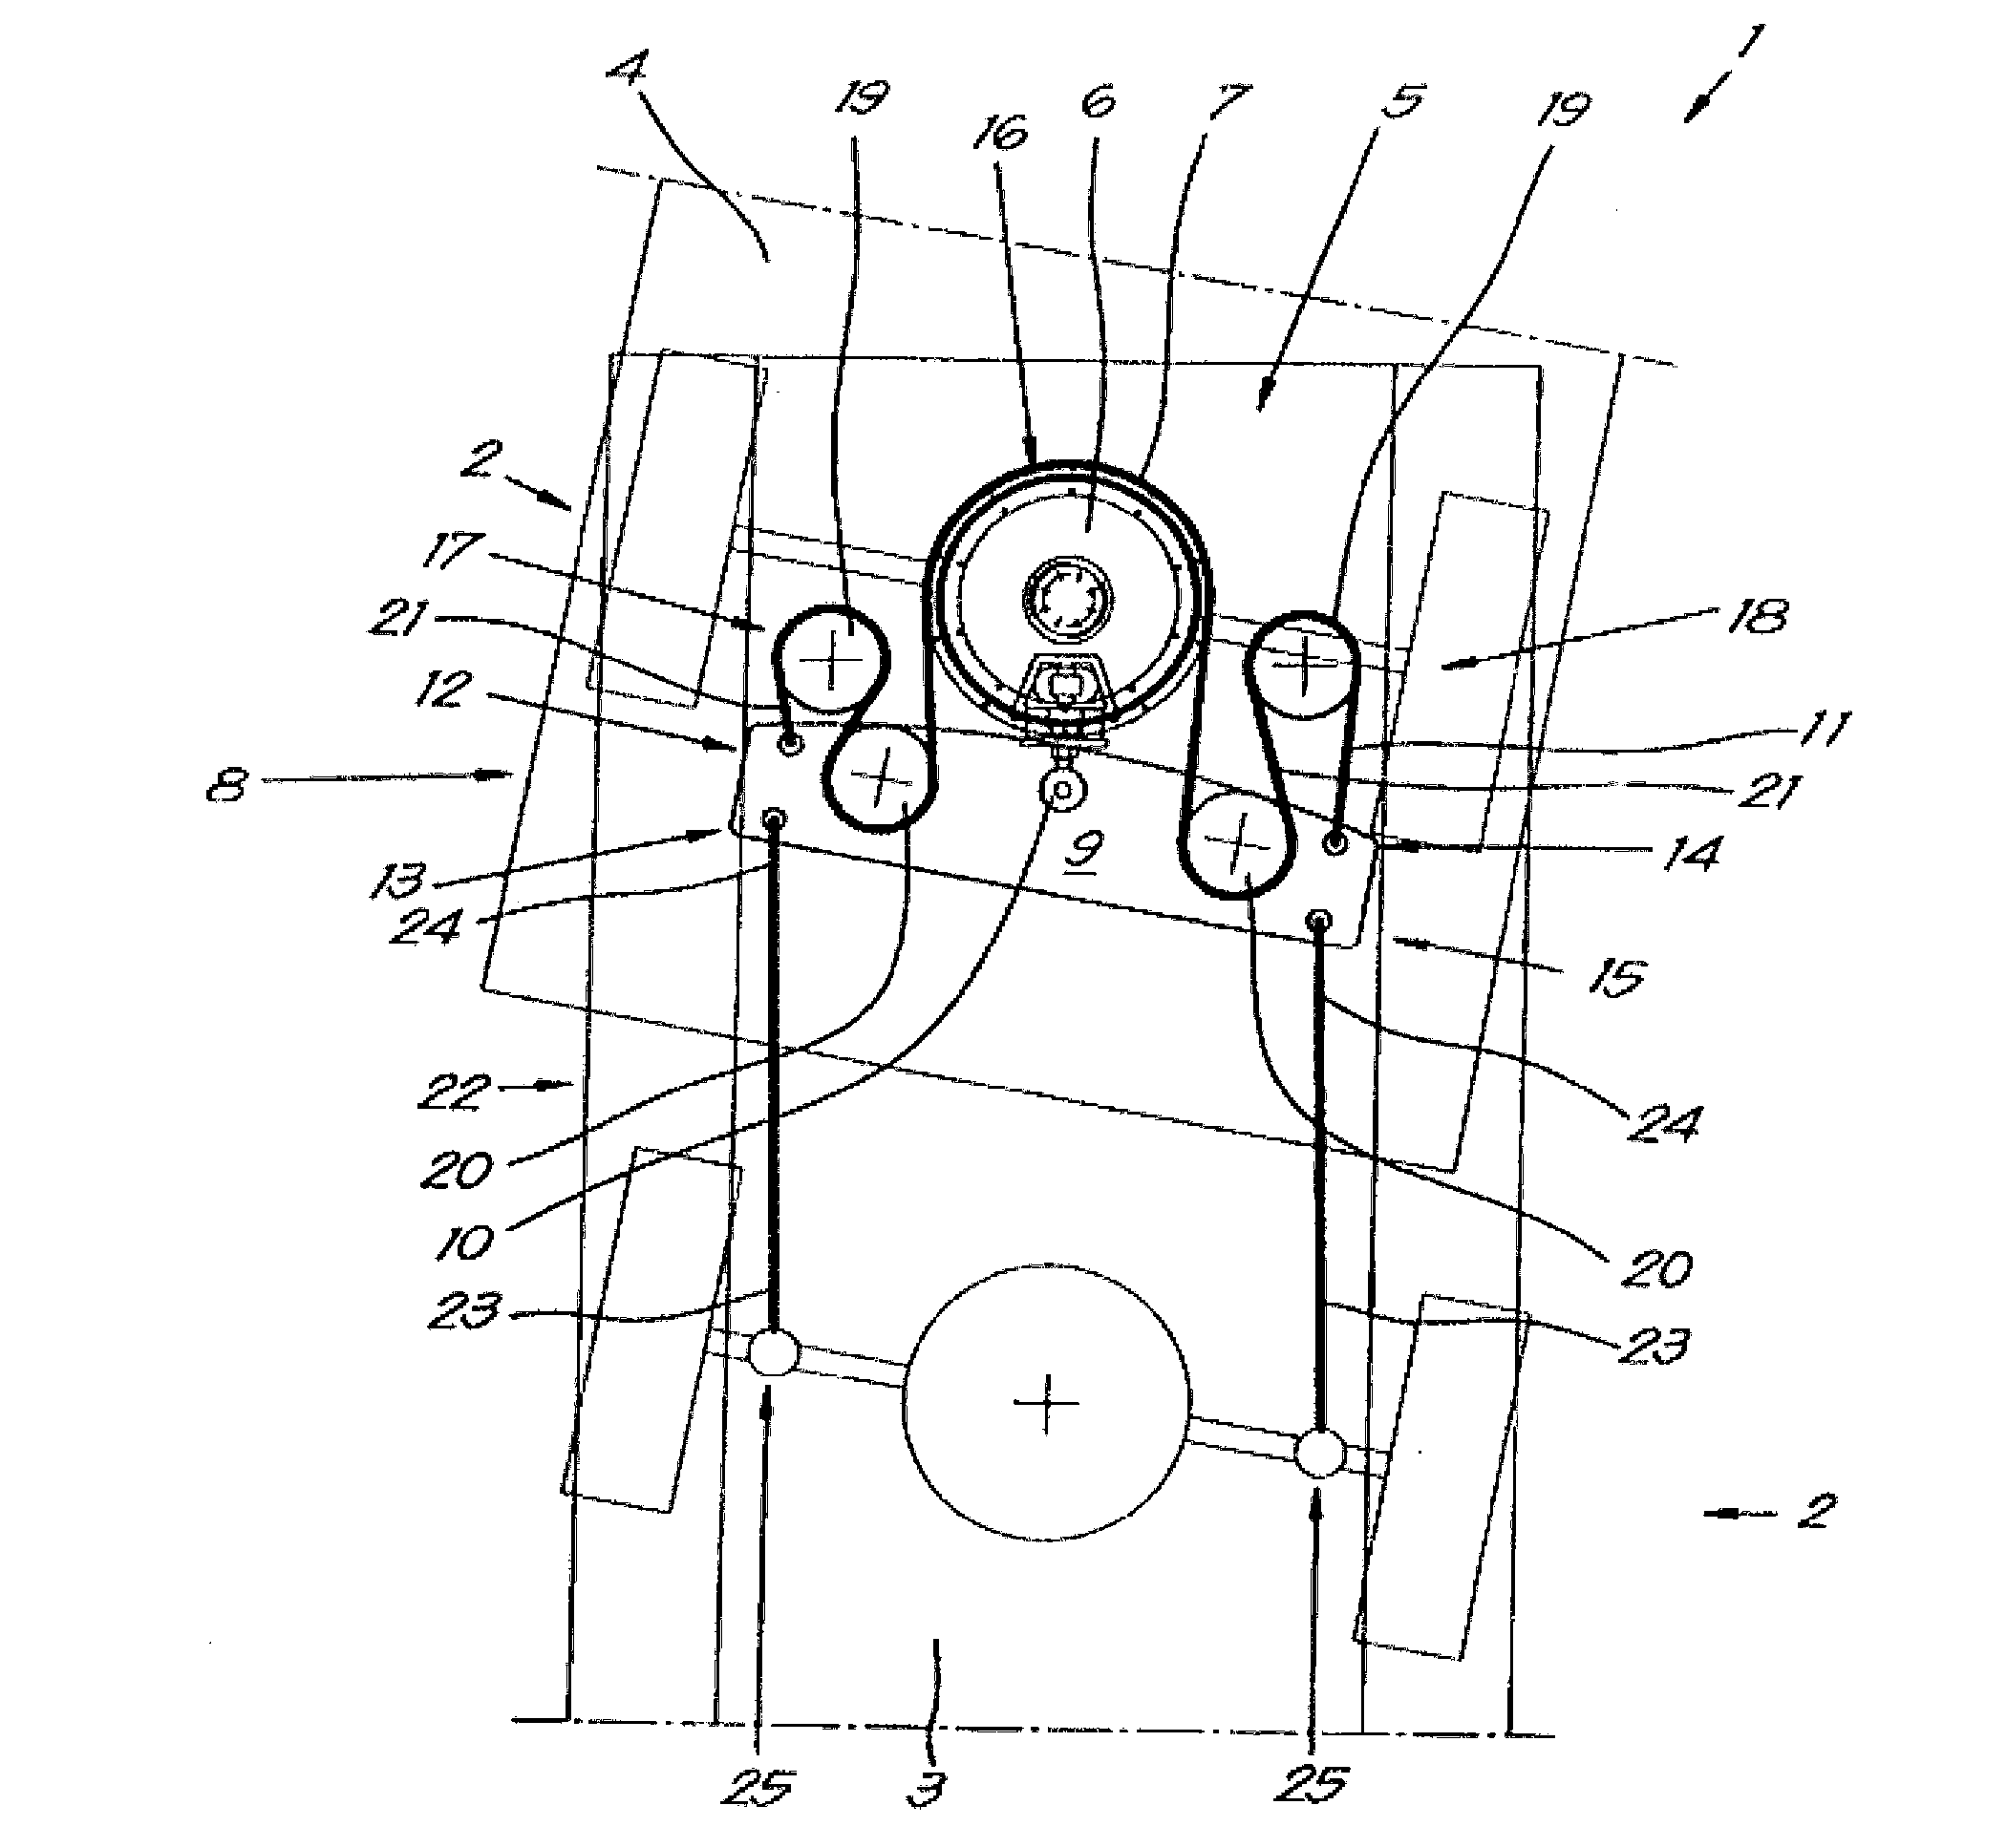 A steering mechanism for a drawn vehicle to steer one or more turnable steered axles